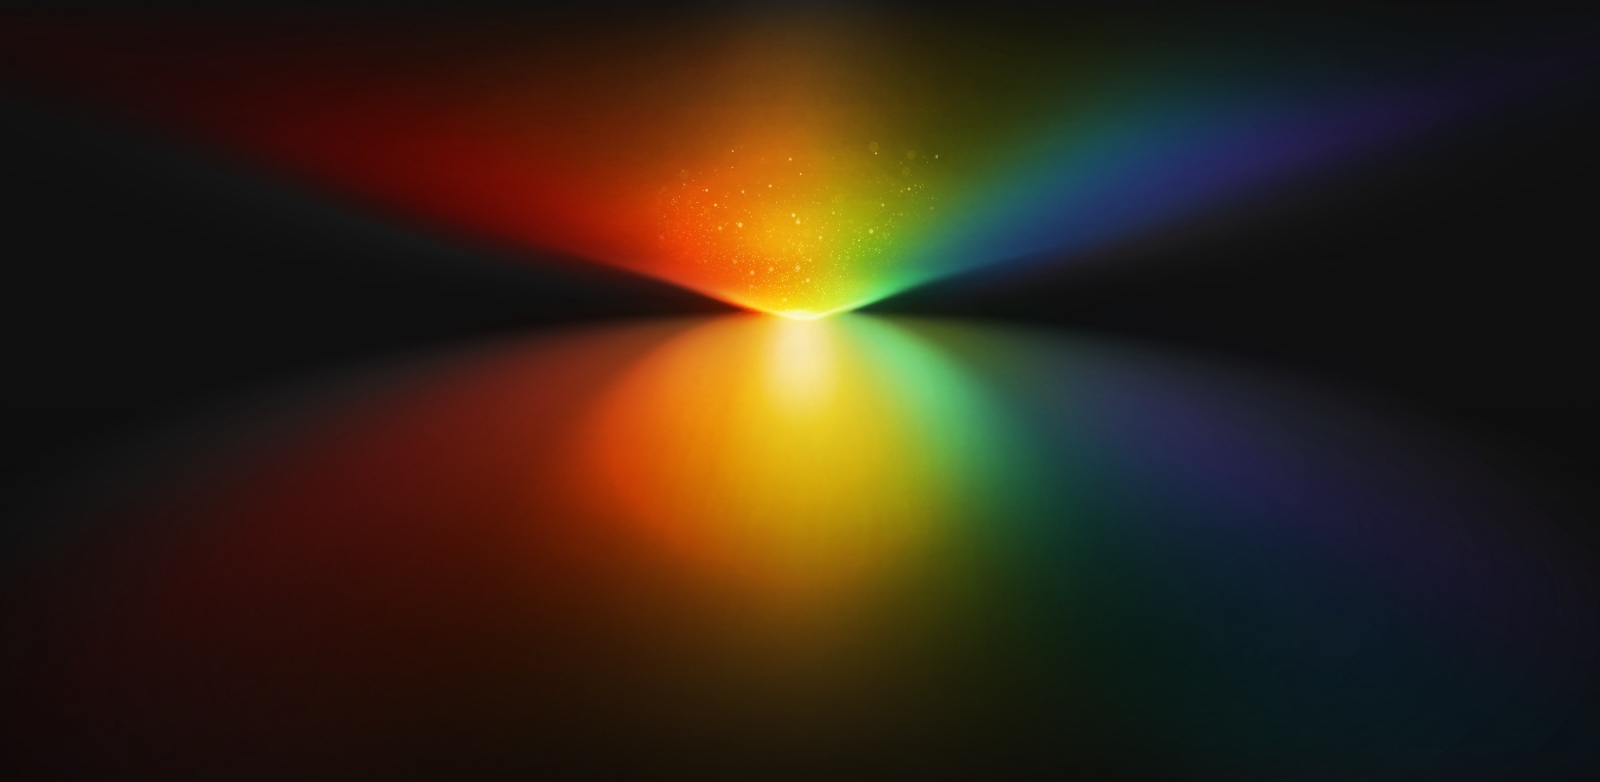 Prism comes in through a hole into black space. 